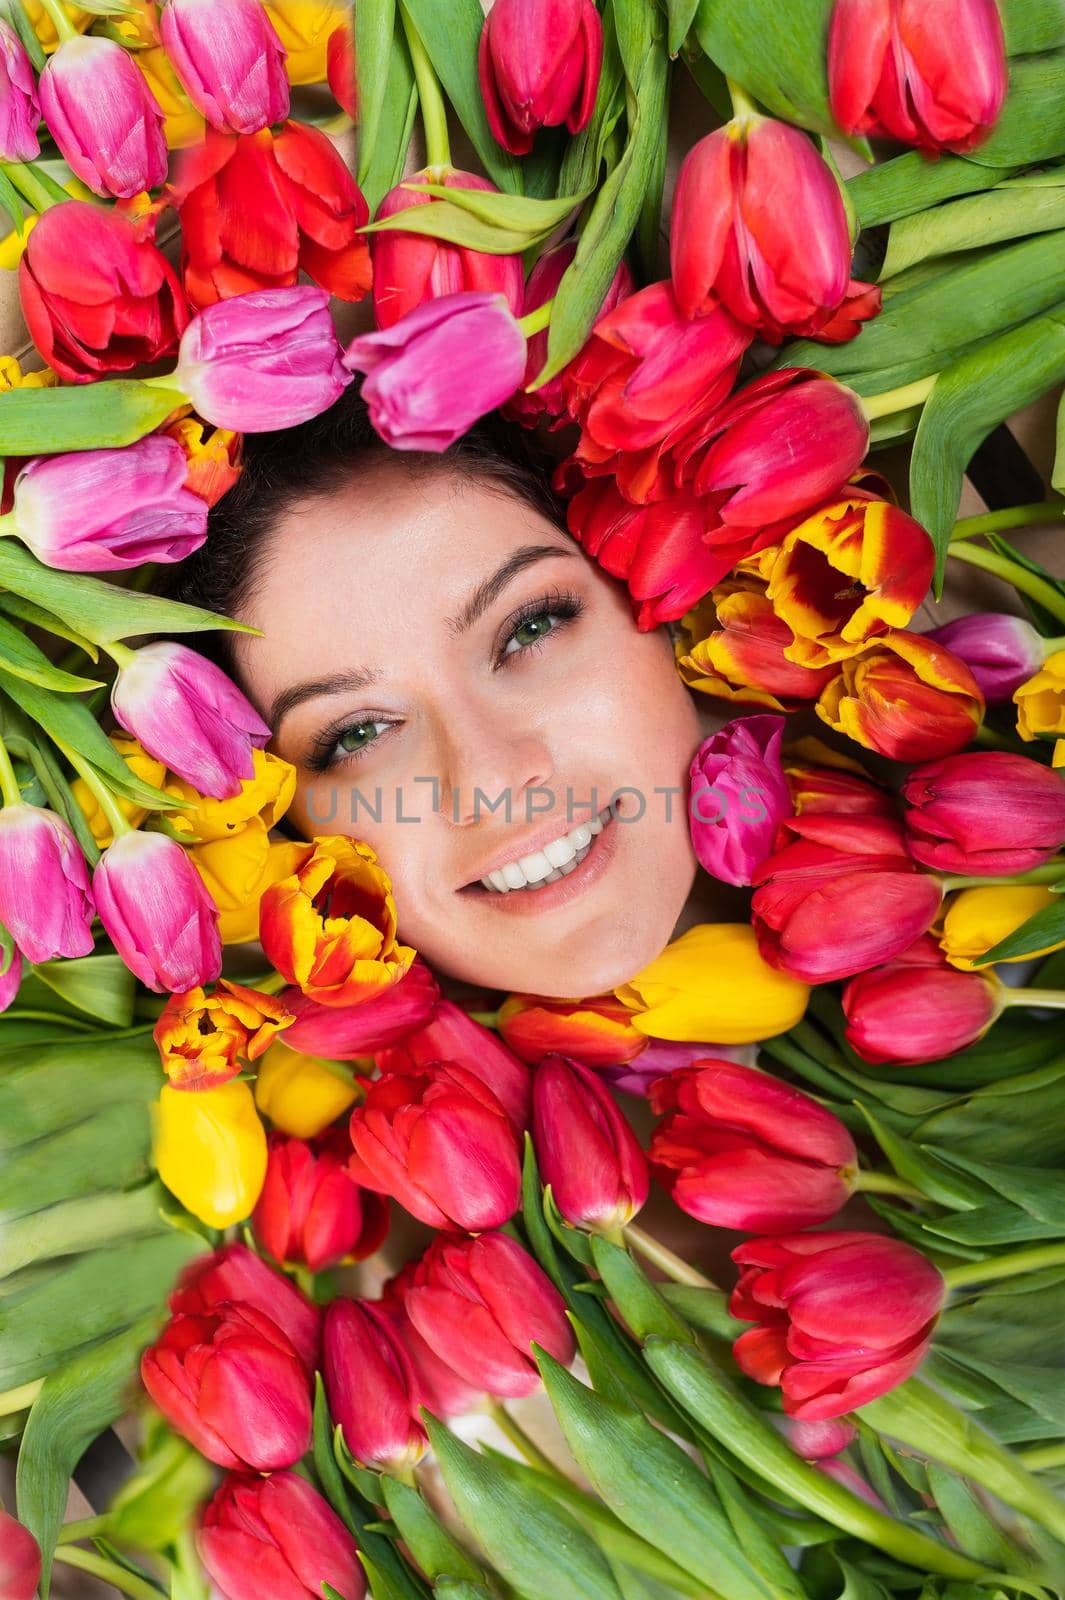 Portrait of a young beautiful woman with tulips around her face. The girl lies in the flowers given for March 8th. International Women's Day